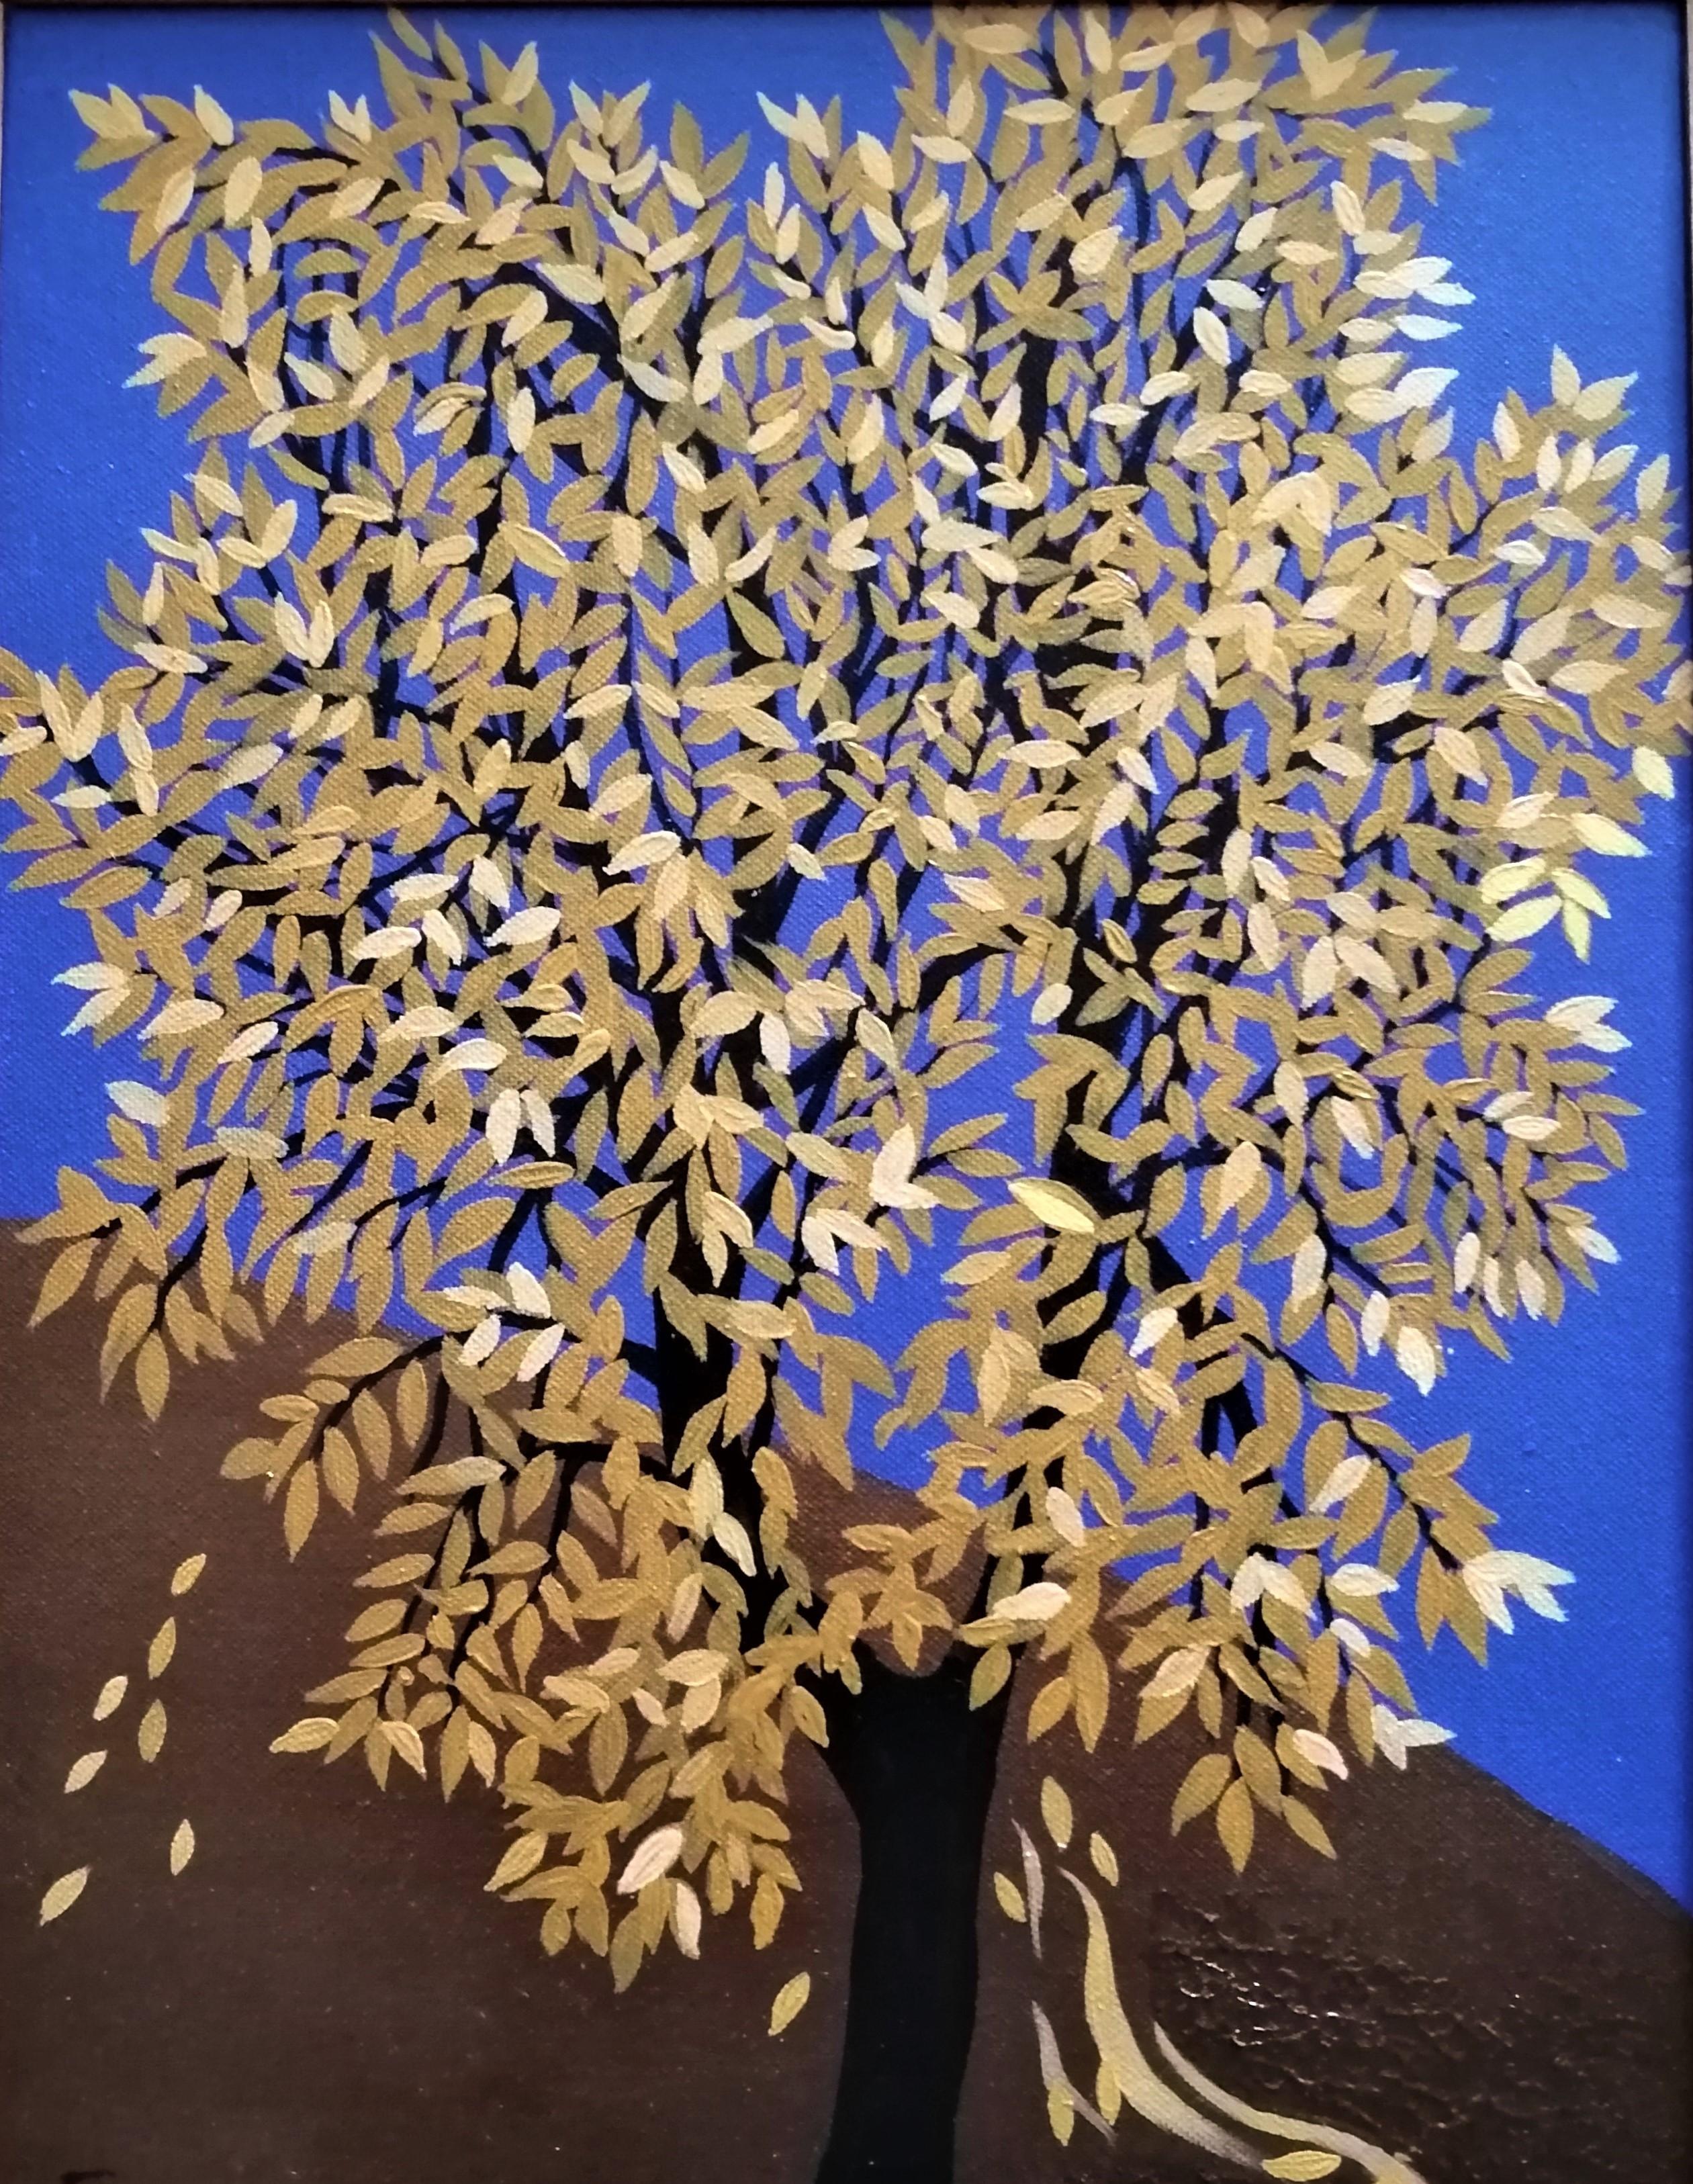 "Autumn Tree" is a painting by Maestro Eleonora Droumeva.

About the artwork:

TECHNIQUE:  oil painting
STYLE: Impressionist, Contemporary
Edition : Unique, signed
Weight: Approximately 1 kg.

The painting is unframed.

Frame: Optional
Snow Pearl